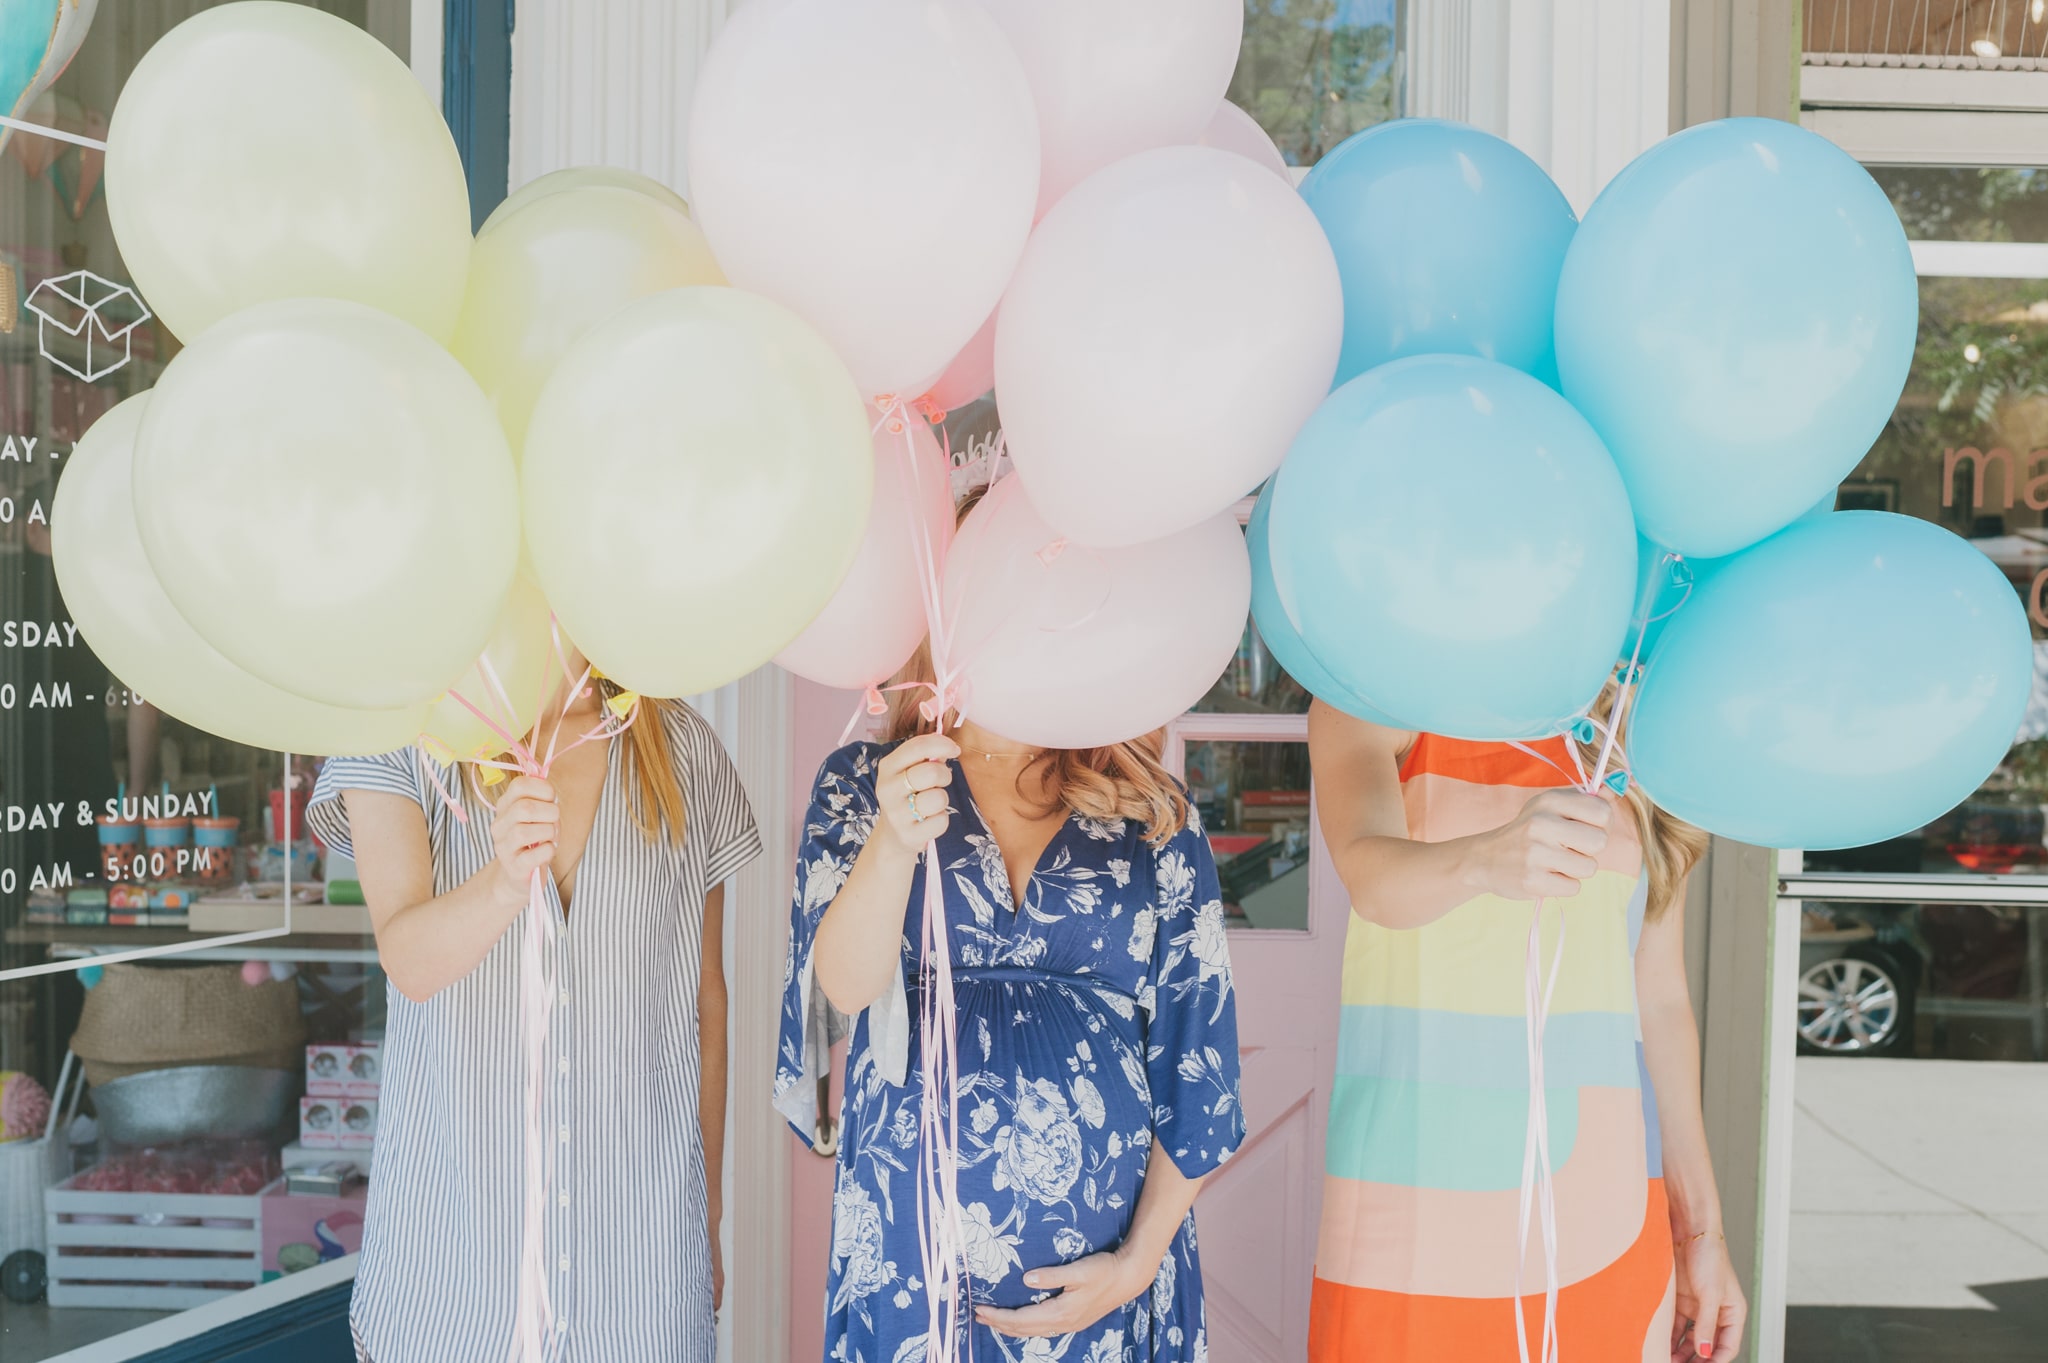 Three girls holding yellow, pink and blue bunches of balloons in front of their faces - Project Nursery